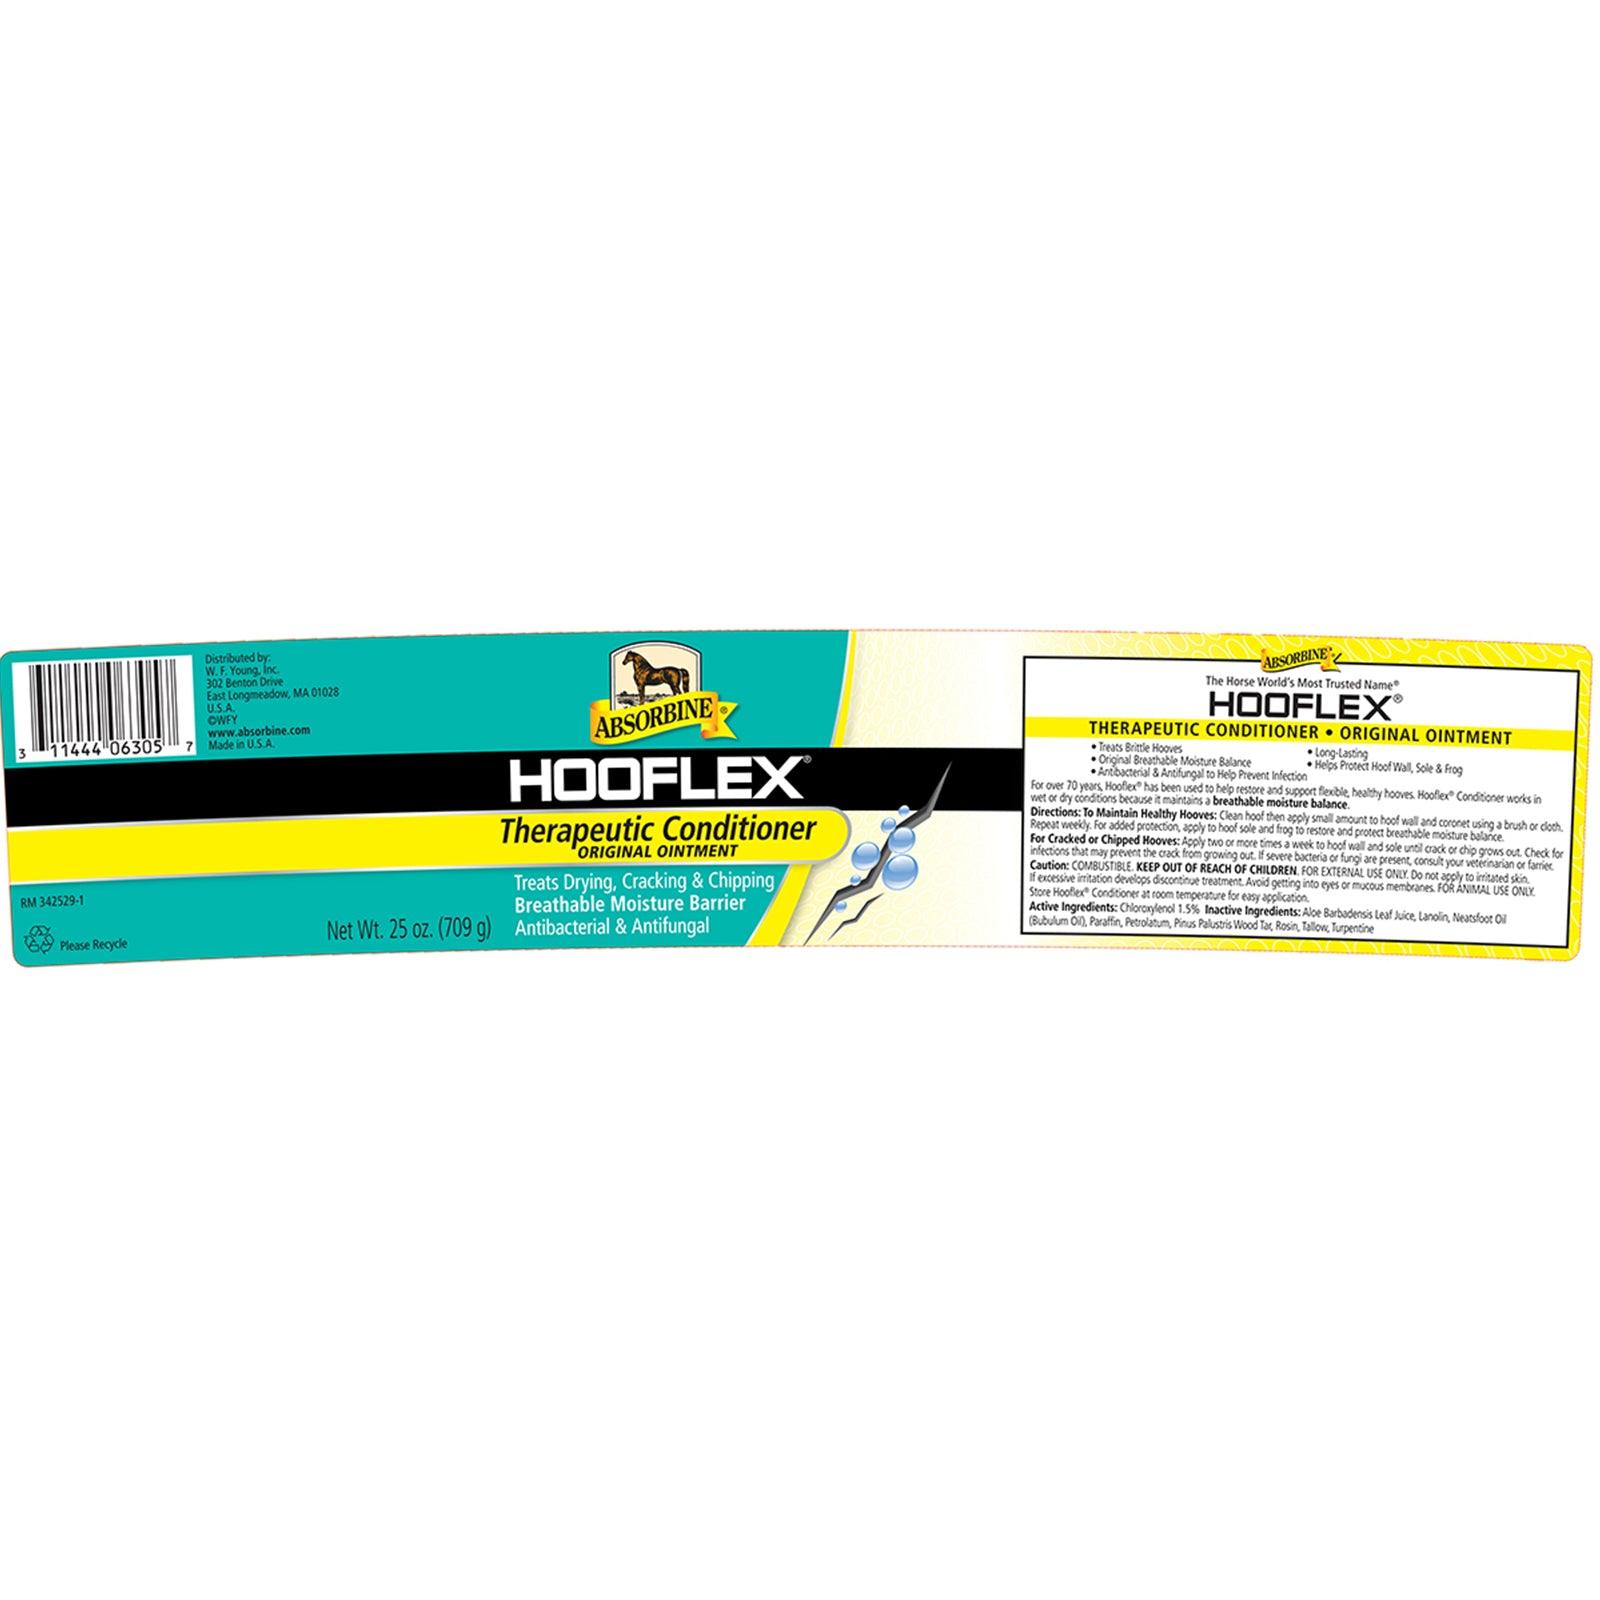 Hooflex® Therapeutic Conditioner Ointment Hoof Care absorbine   